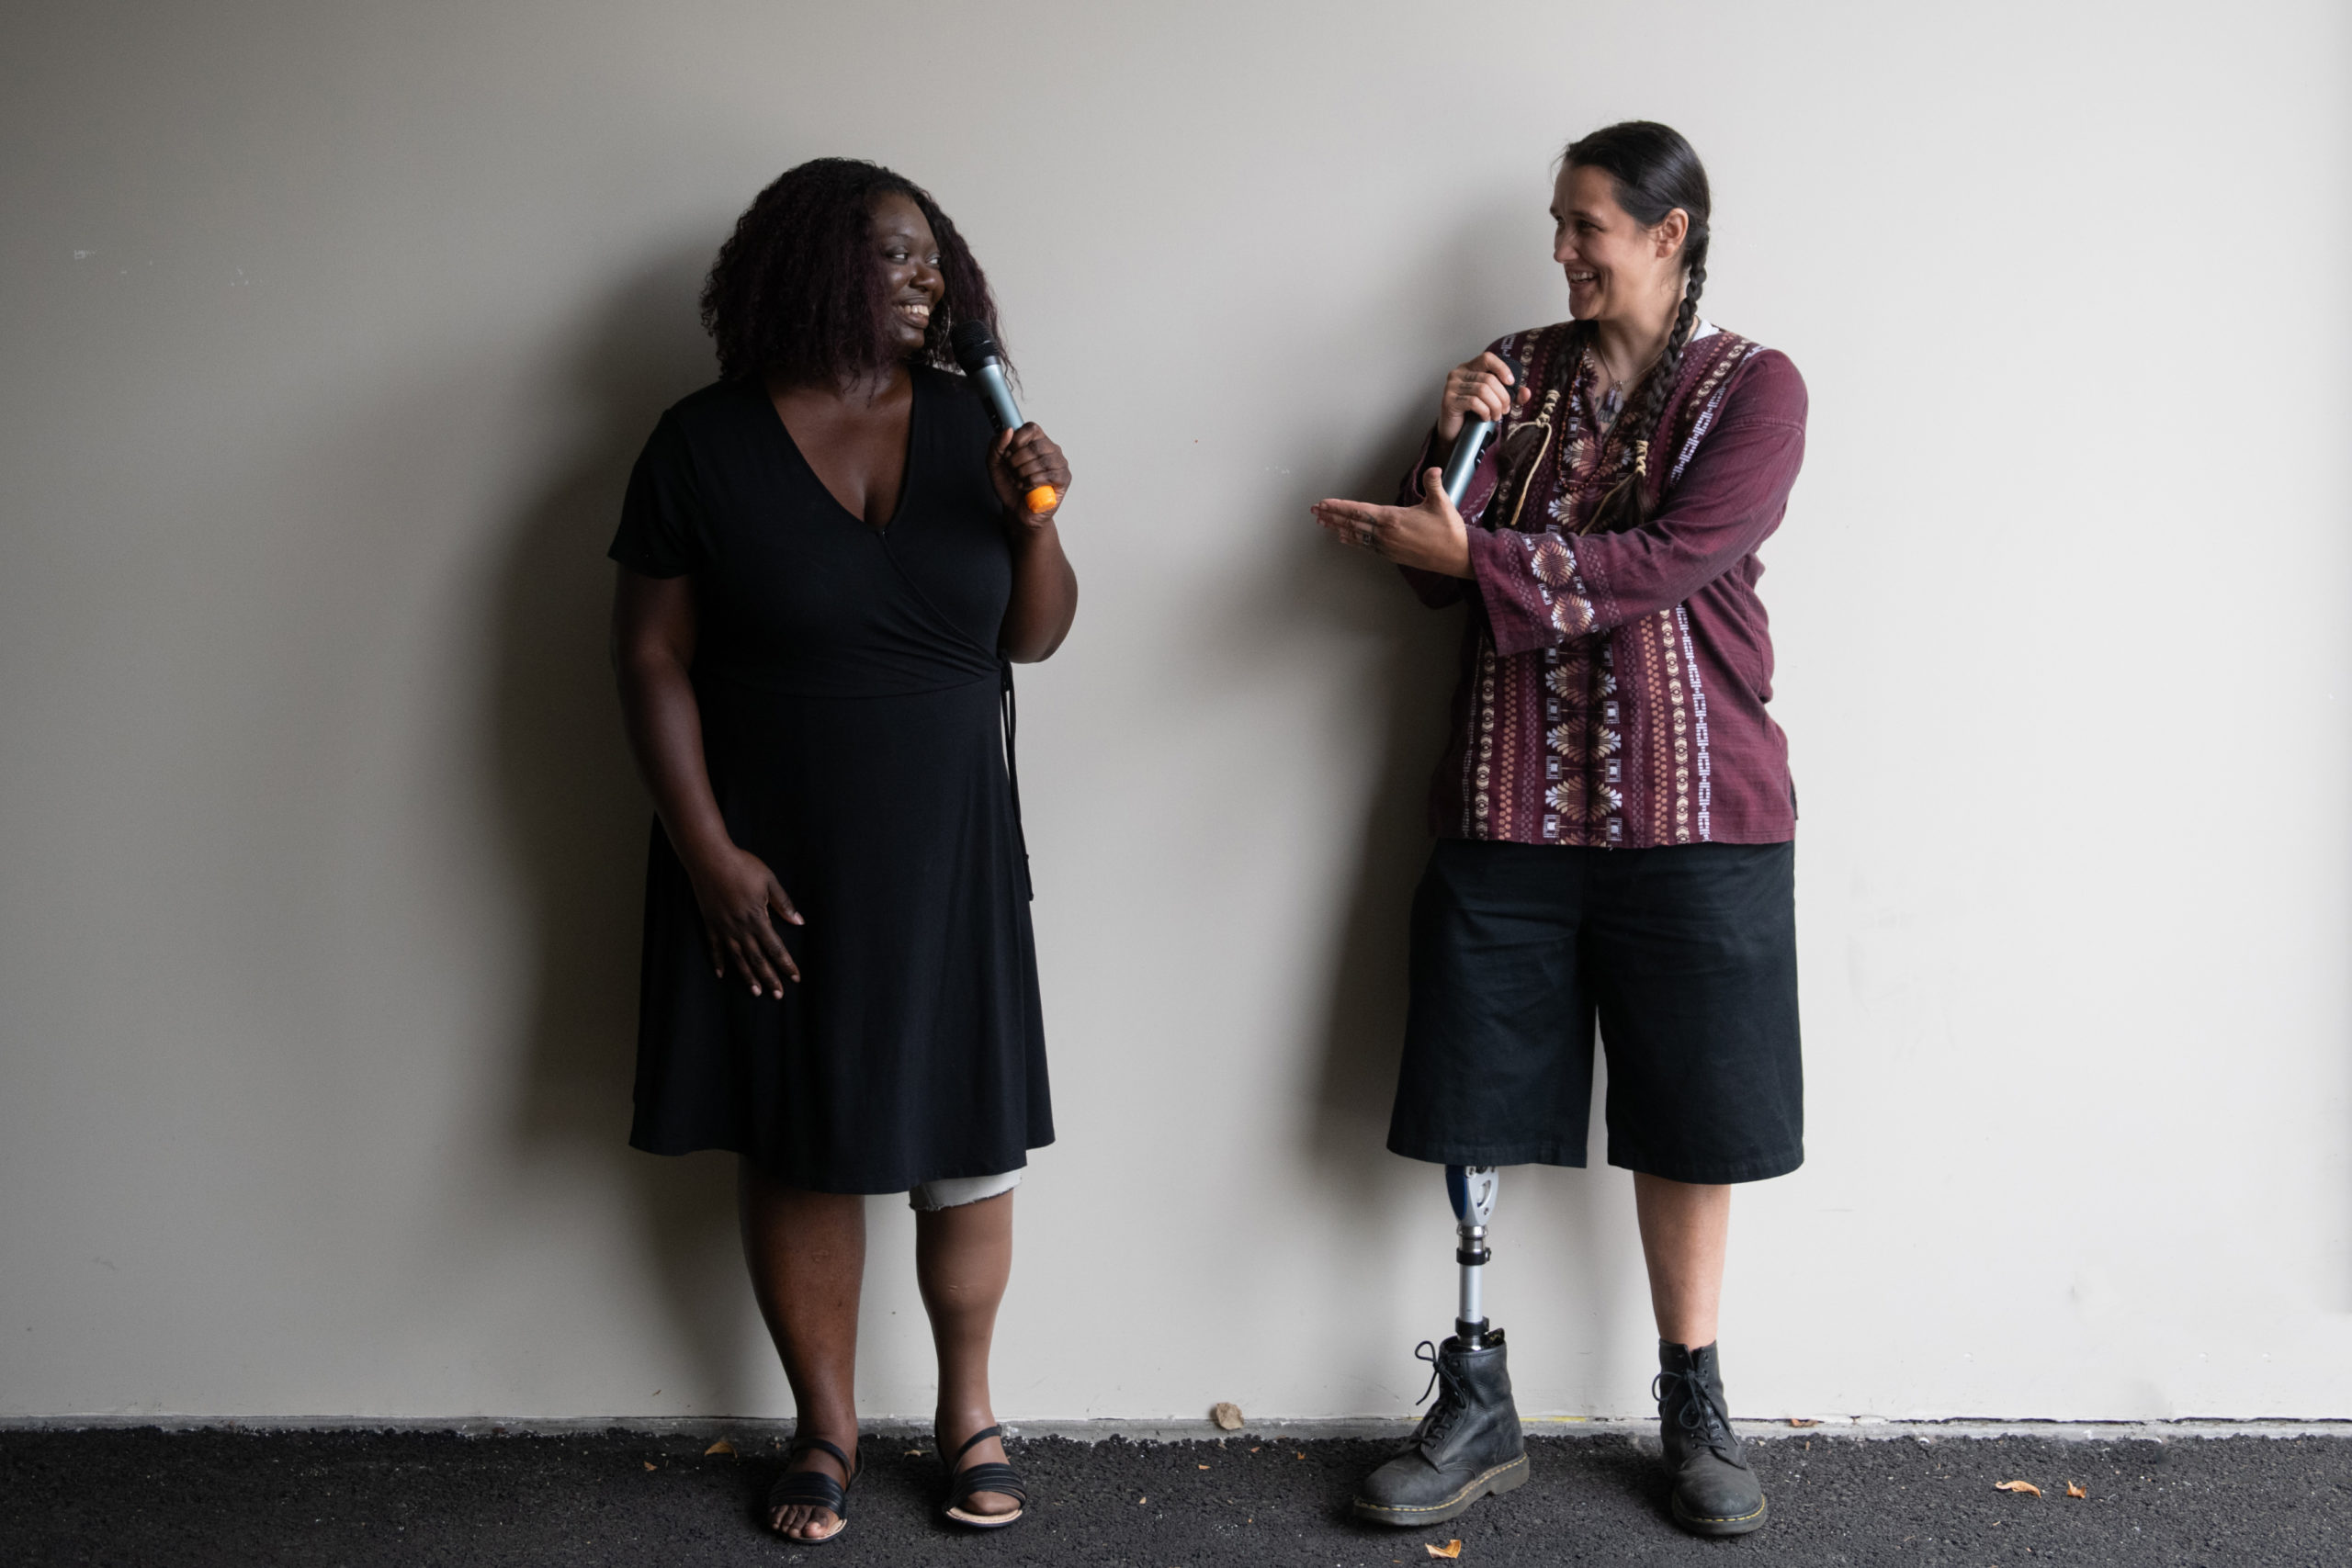 An Indigenous Two-Spirit person and a Black woman face each other and gesture while smiling and speaking into microphones. They are both wearing prosthetic legs.